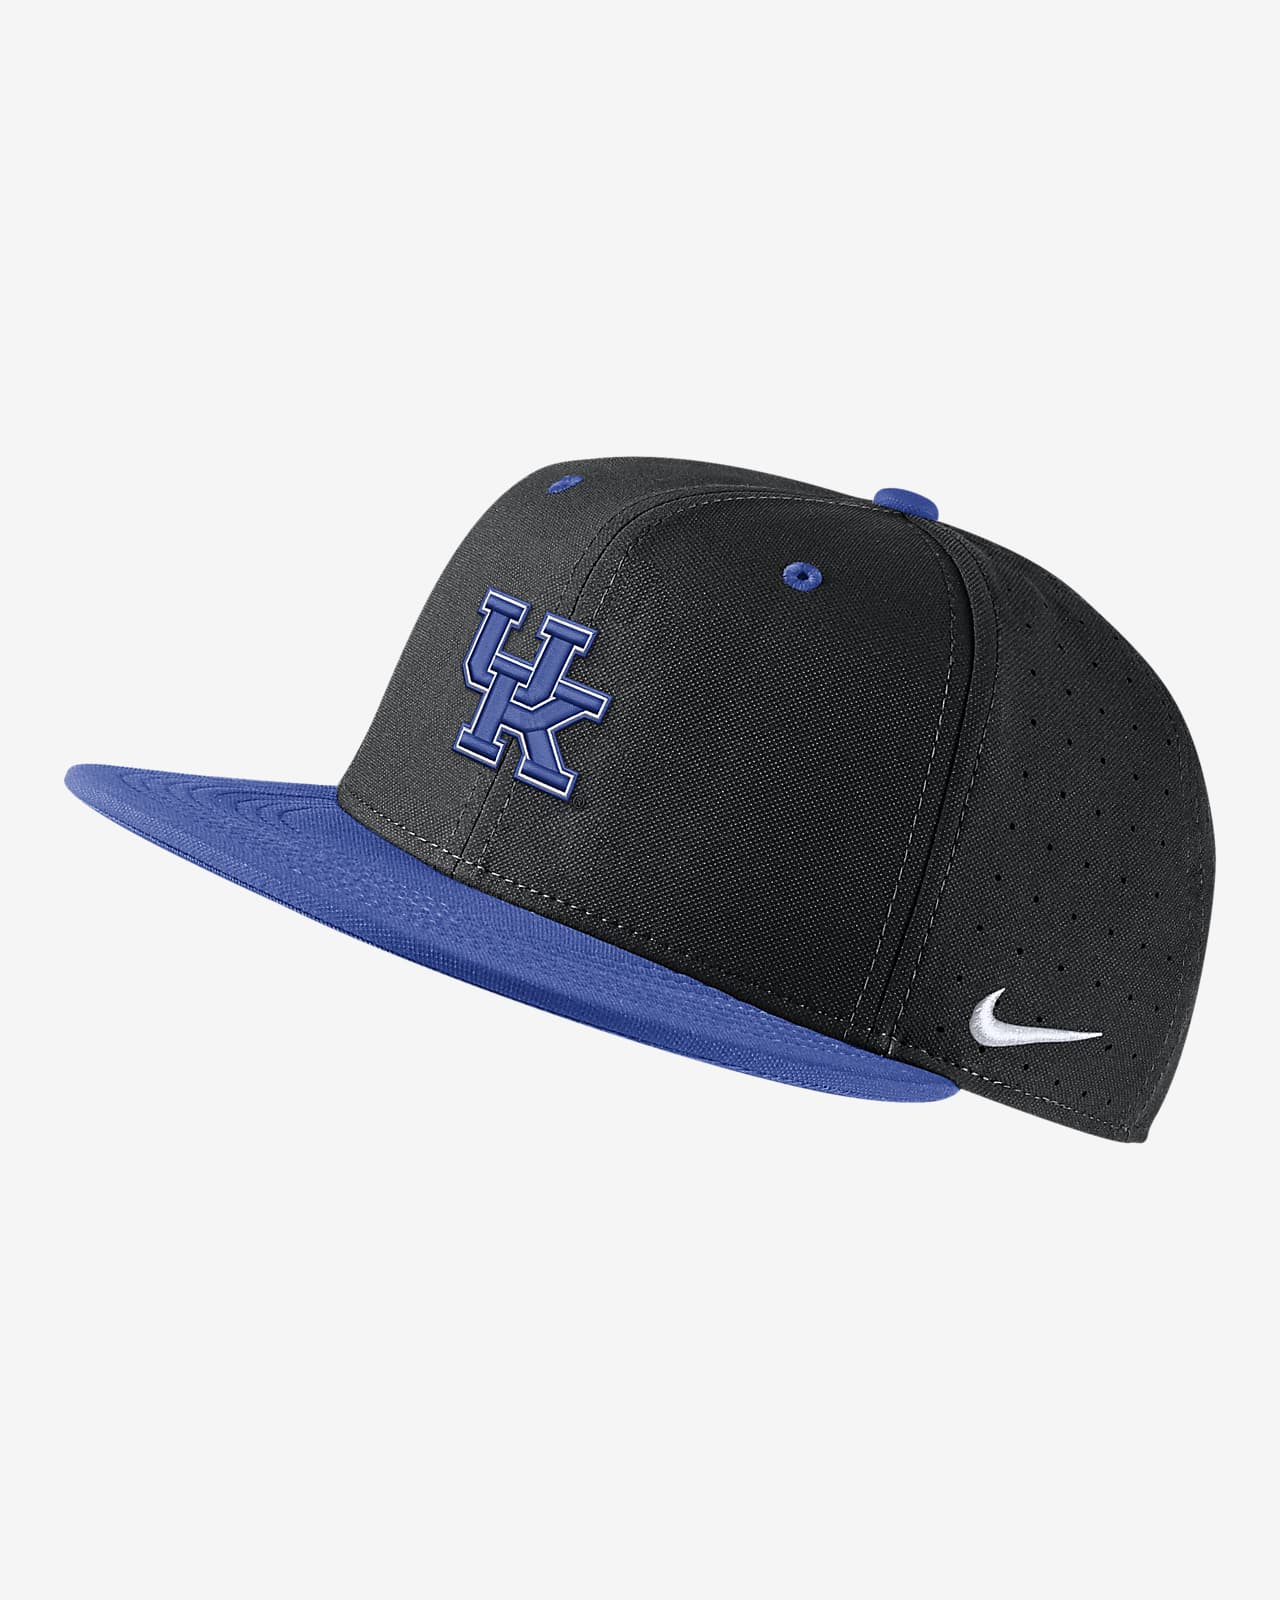 Kentucky Nike College Fitted Baseball Hat